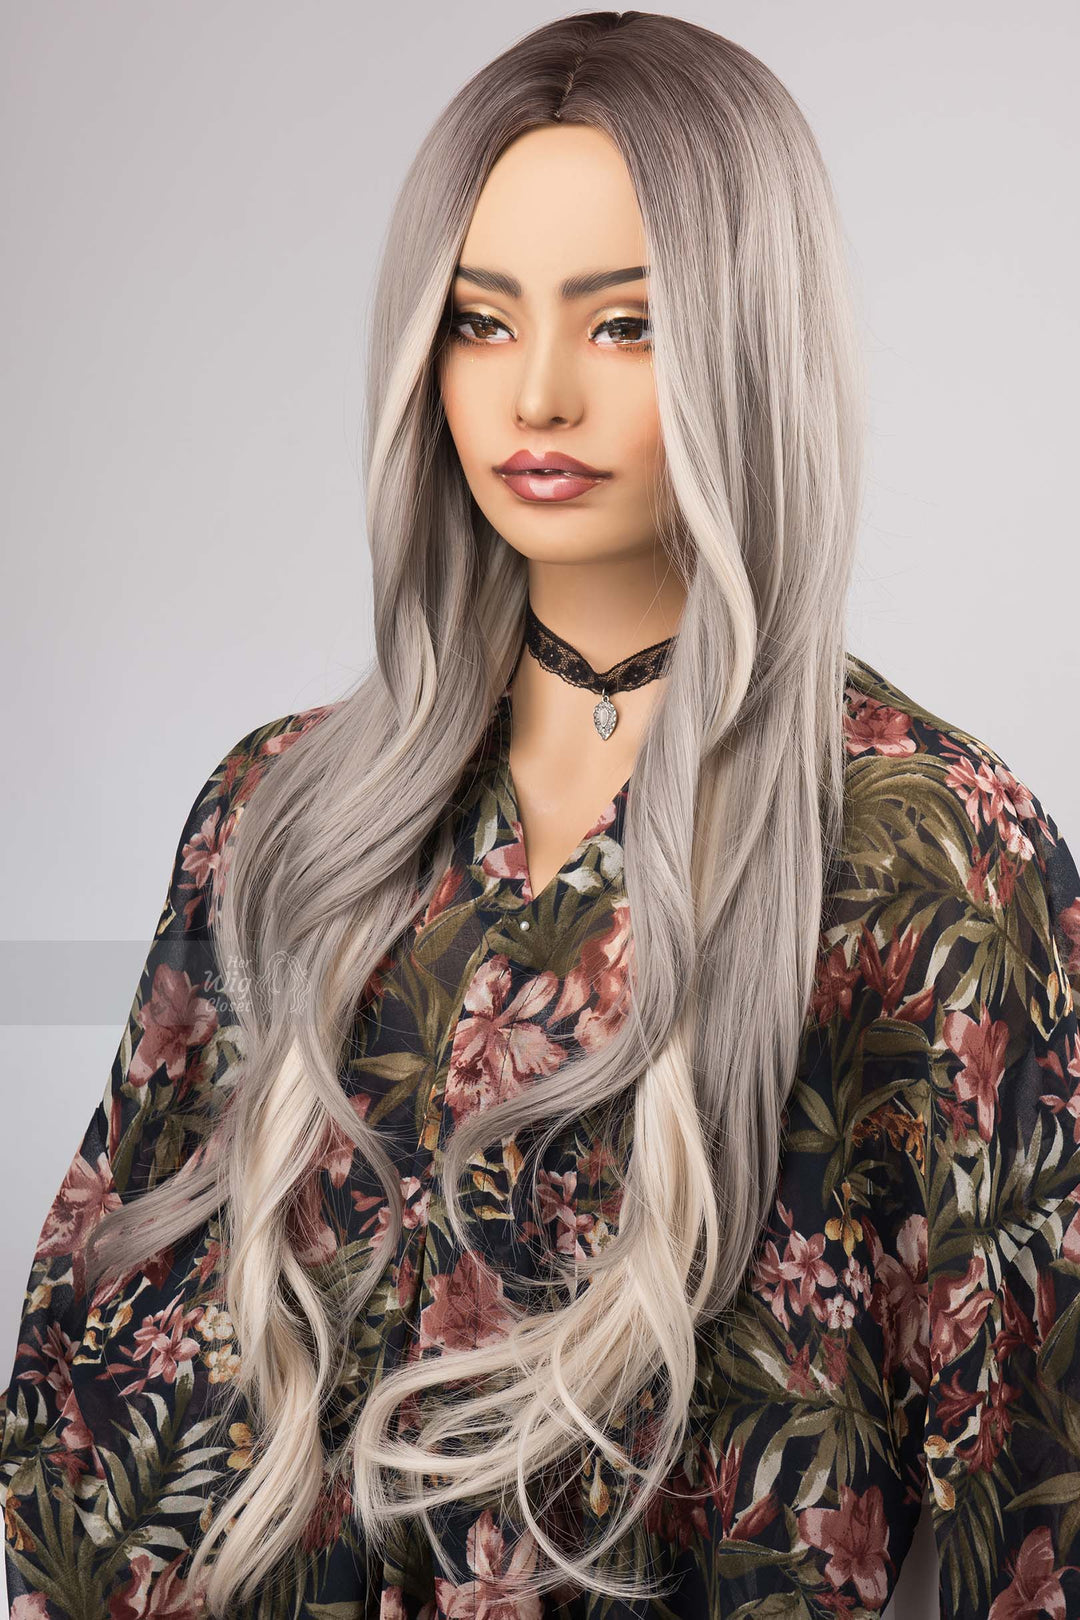 Multi Grey with White Blonde Highlight Ombre Wig with Long Wavy Hair Herwigcloset Astrid